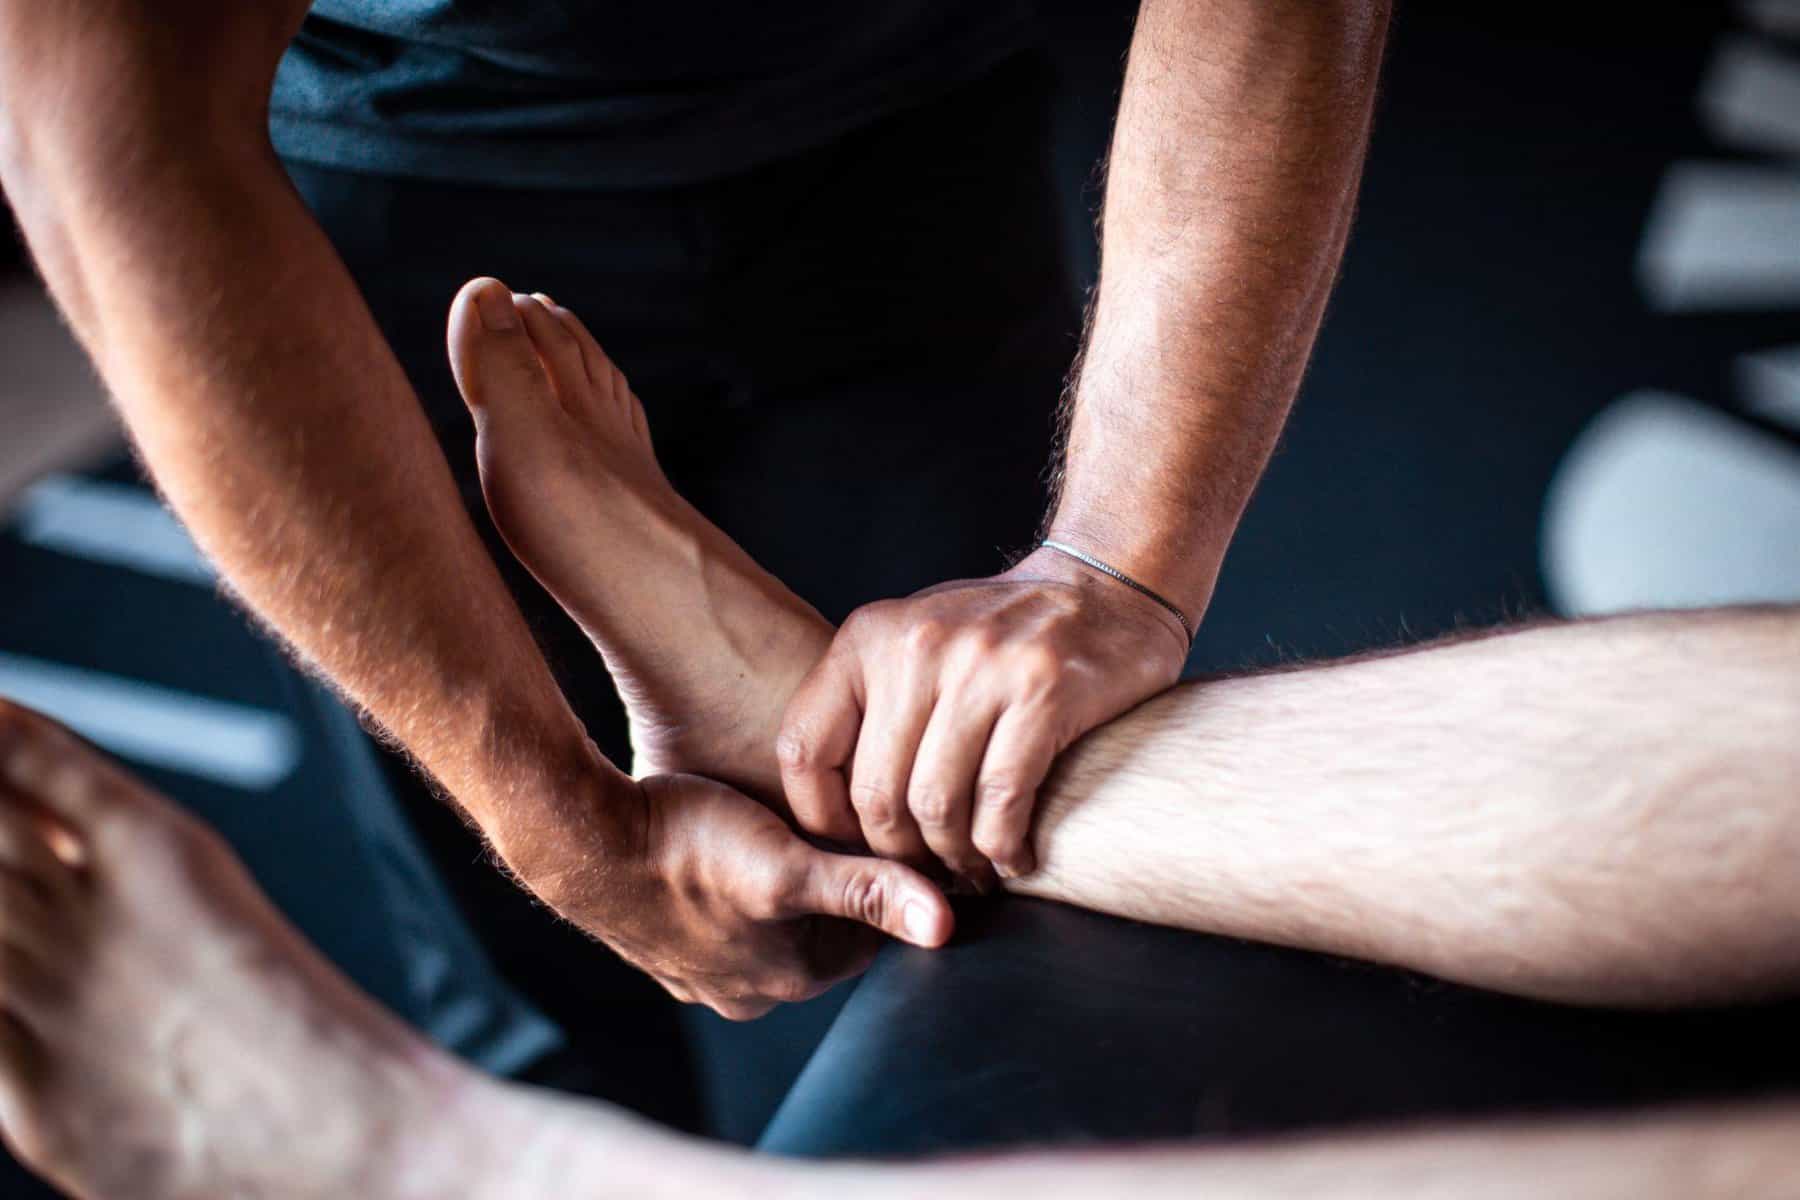 physical therapist performing hands on manual therapy with a patient with plantar fasciitis pain close up shot